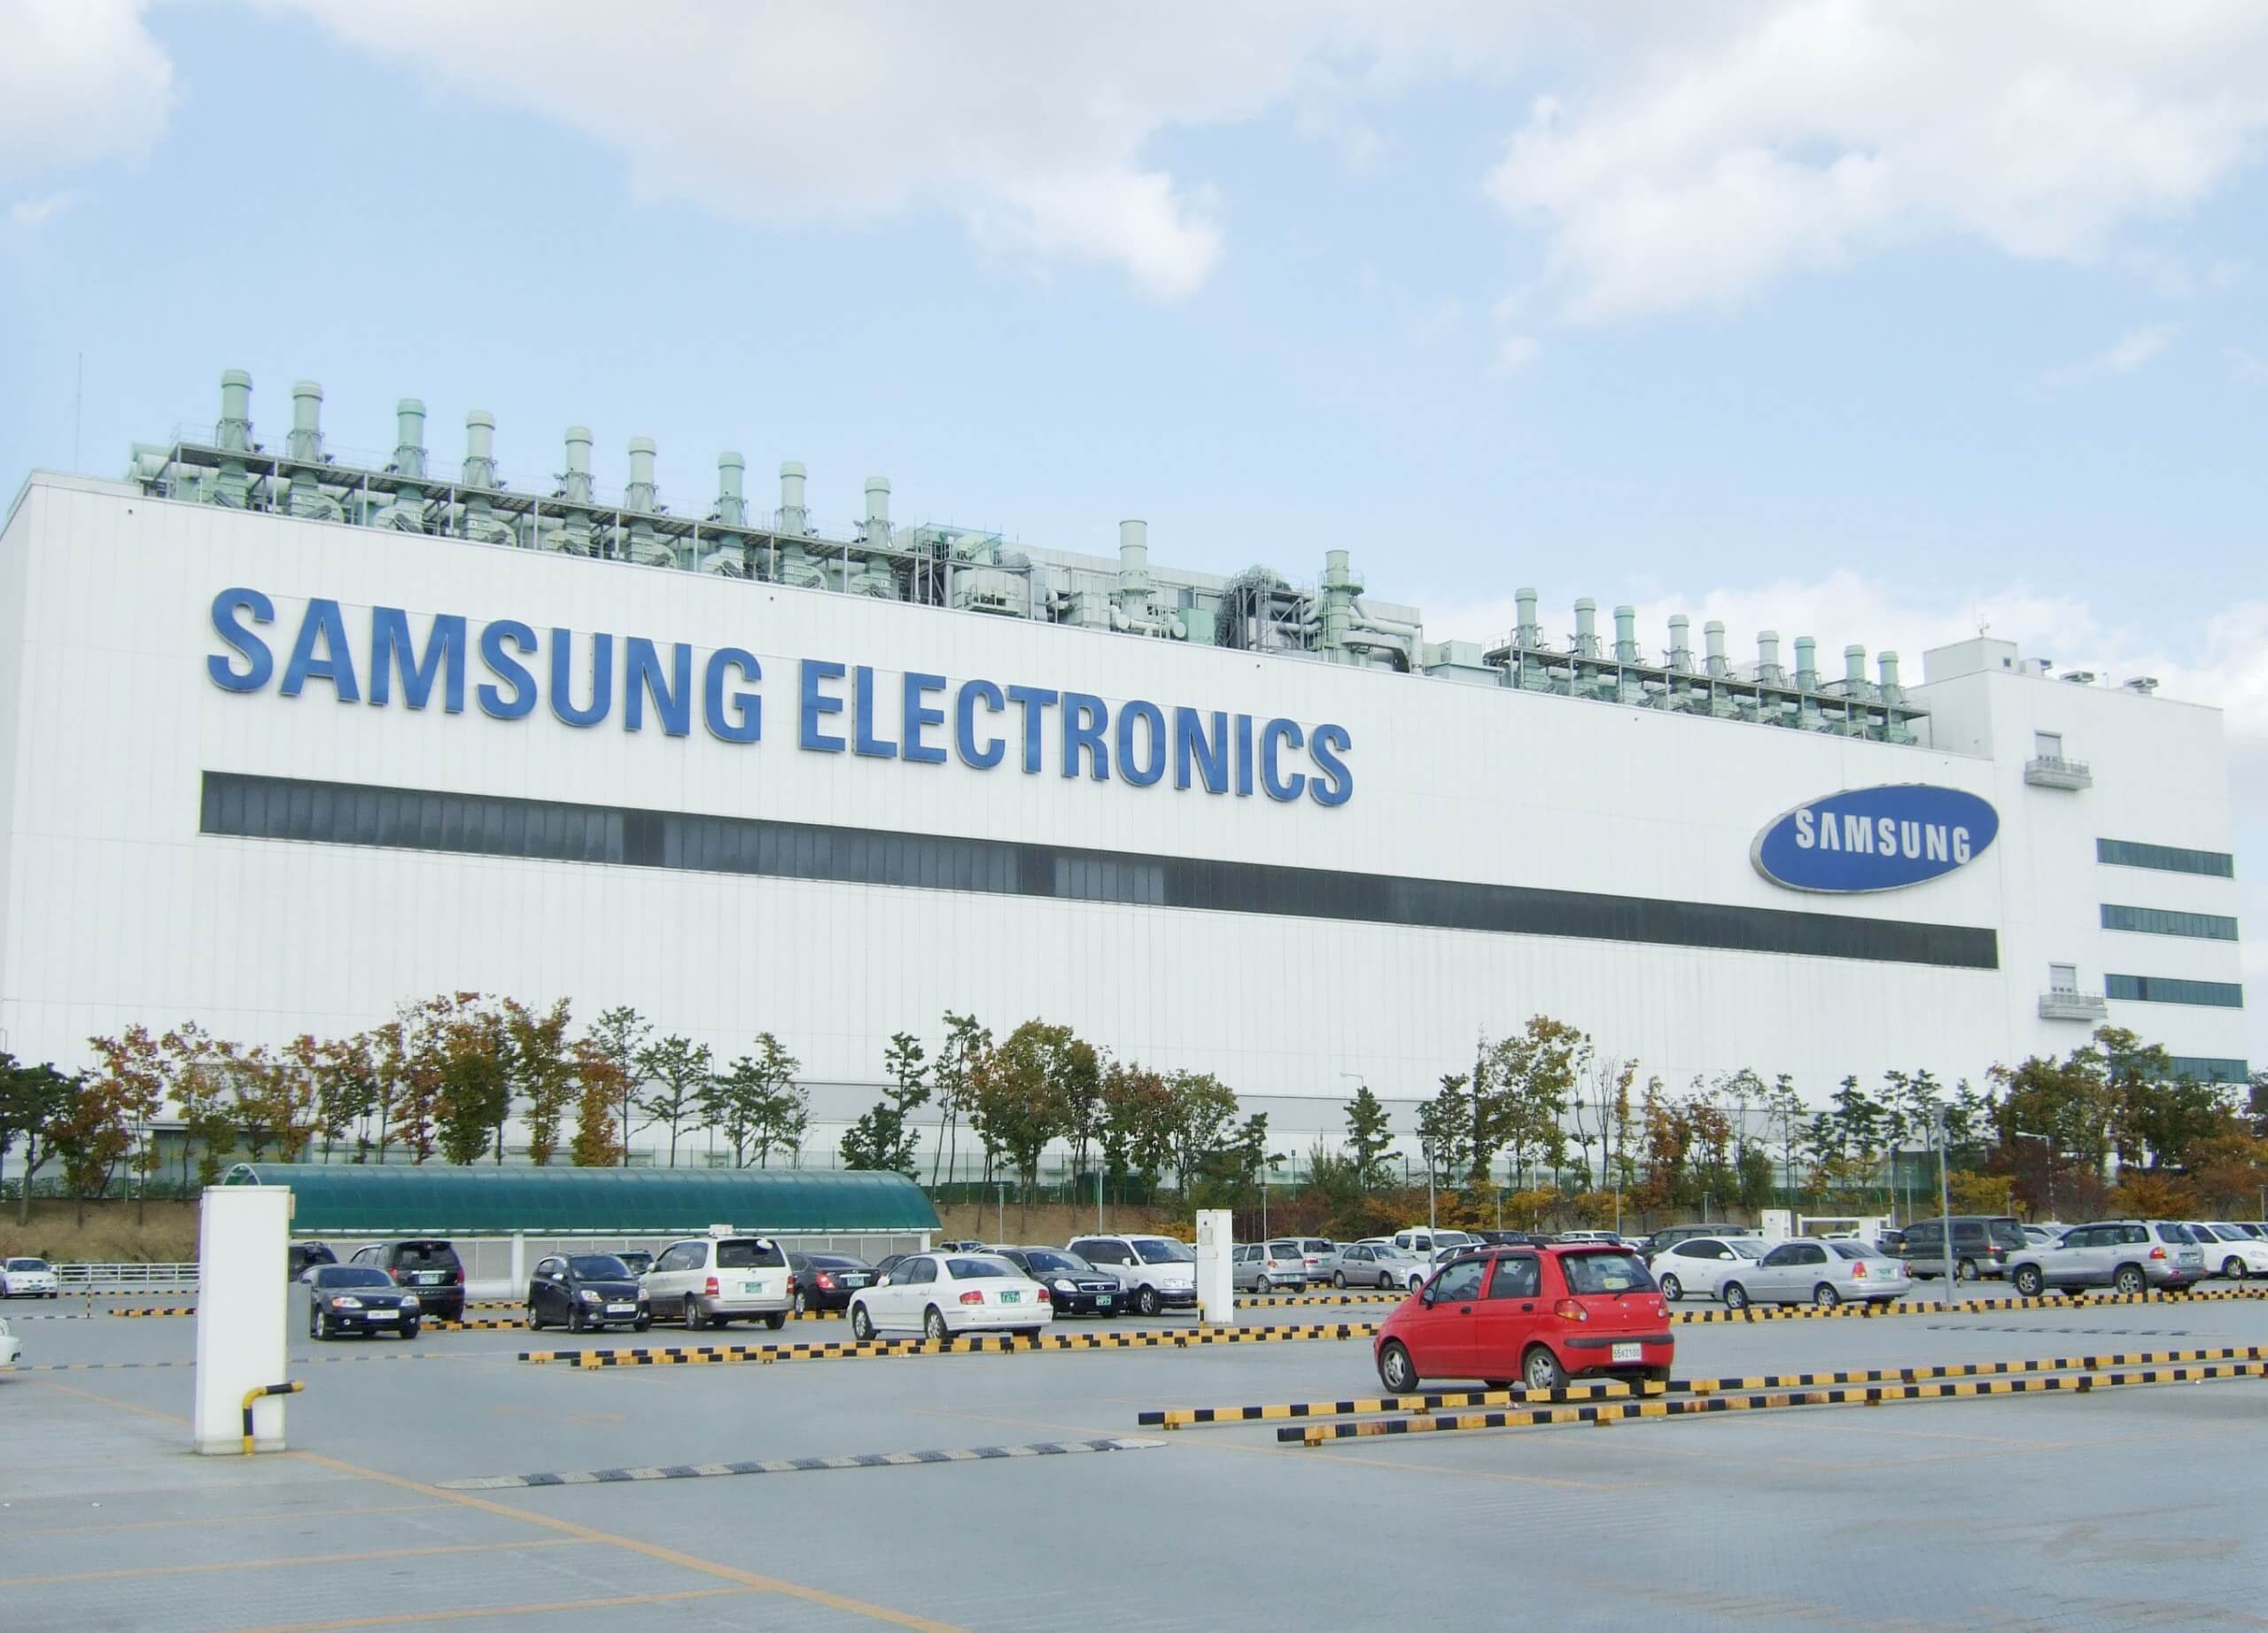 Samsung Electronics union declares workers will go on strike “indefinitely” – The TechLead